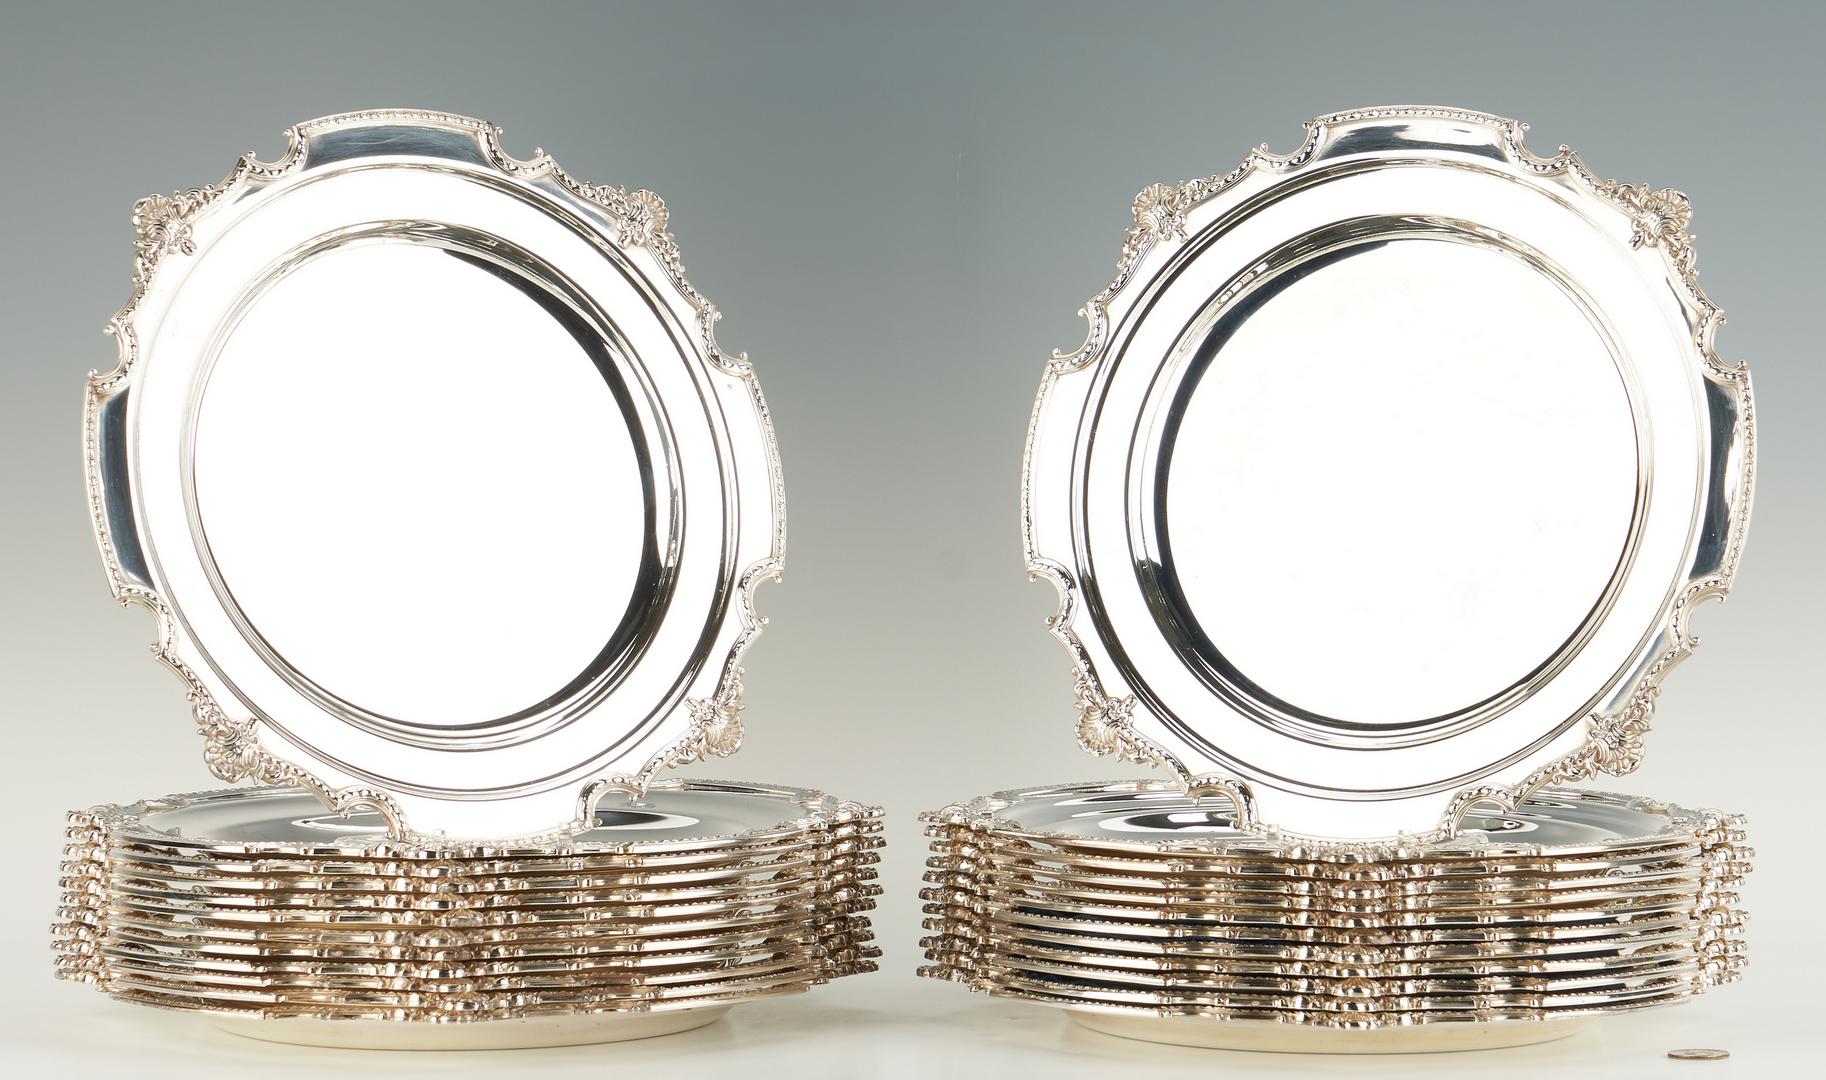 Lot 946: 24 Silverplated English Chargers